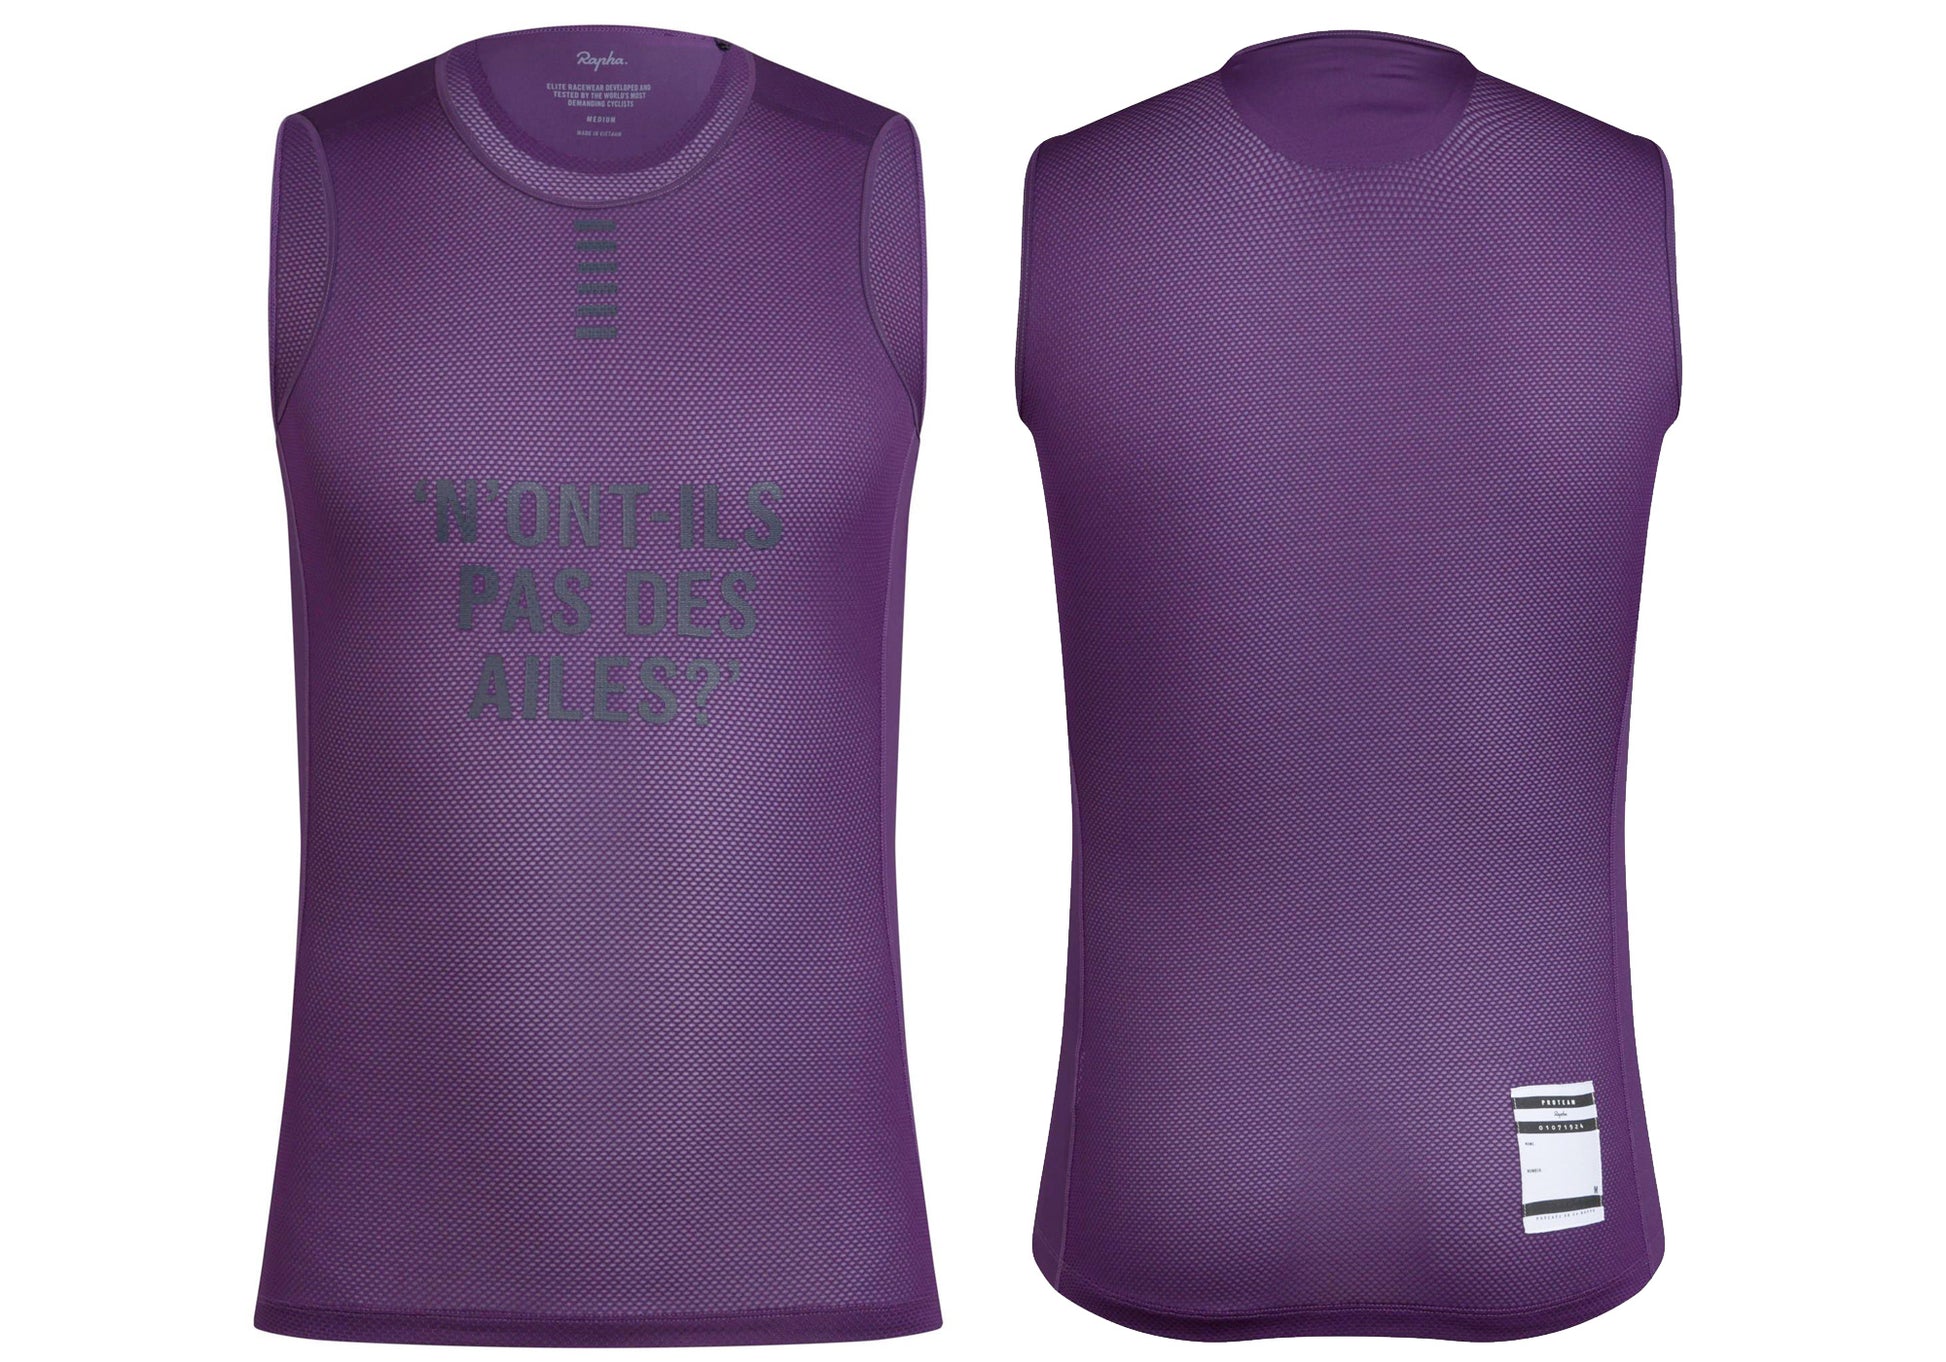 Rapha Mens Pro Team Base Layer - Sleeveless, Purple, buy online at Woolys Wheels with free delivery over $99.00